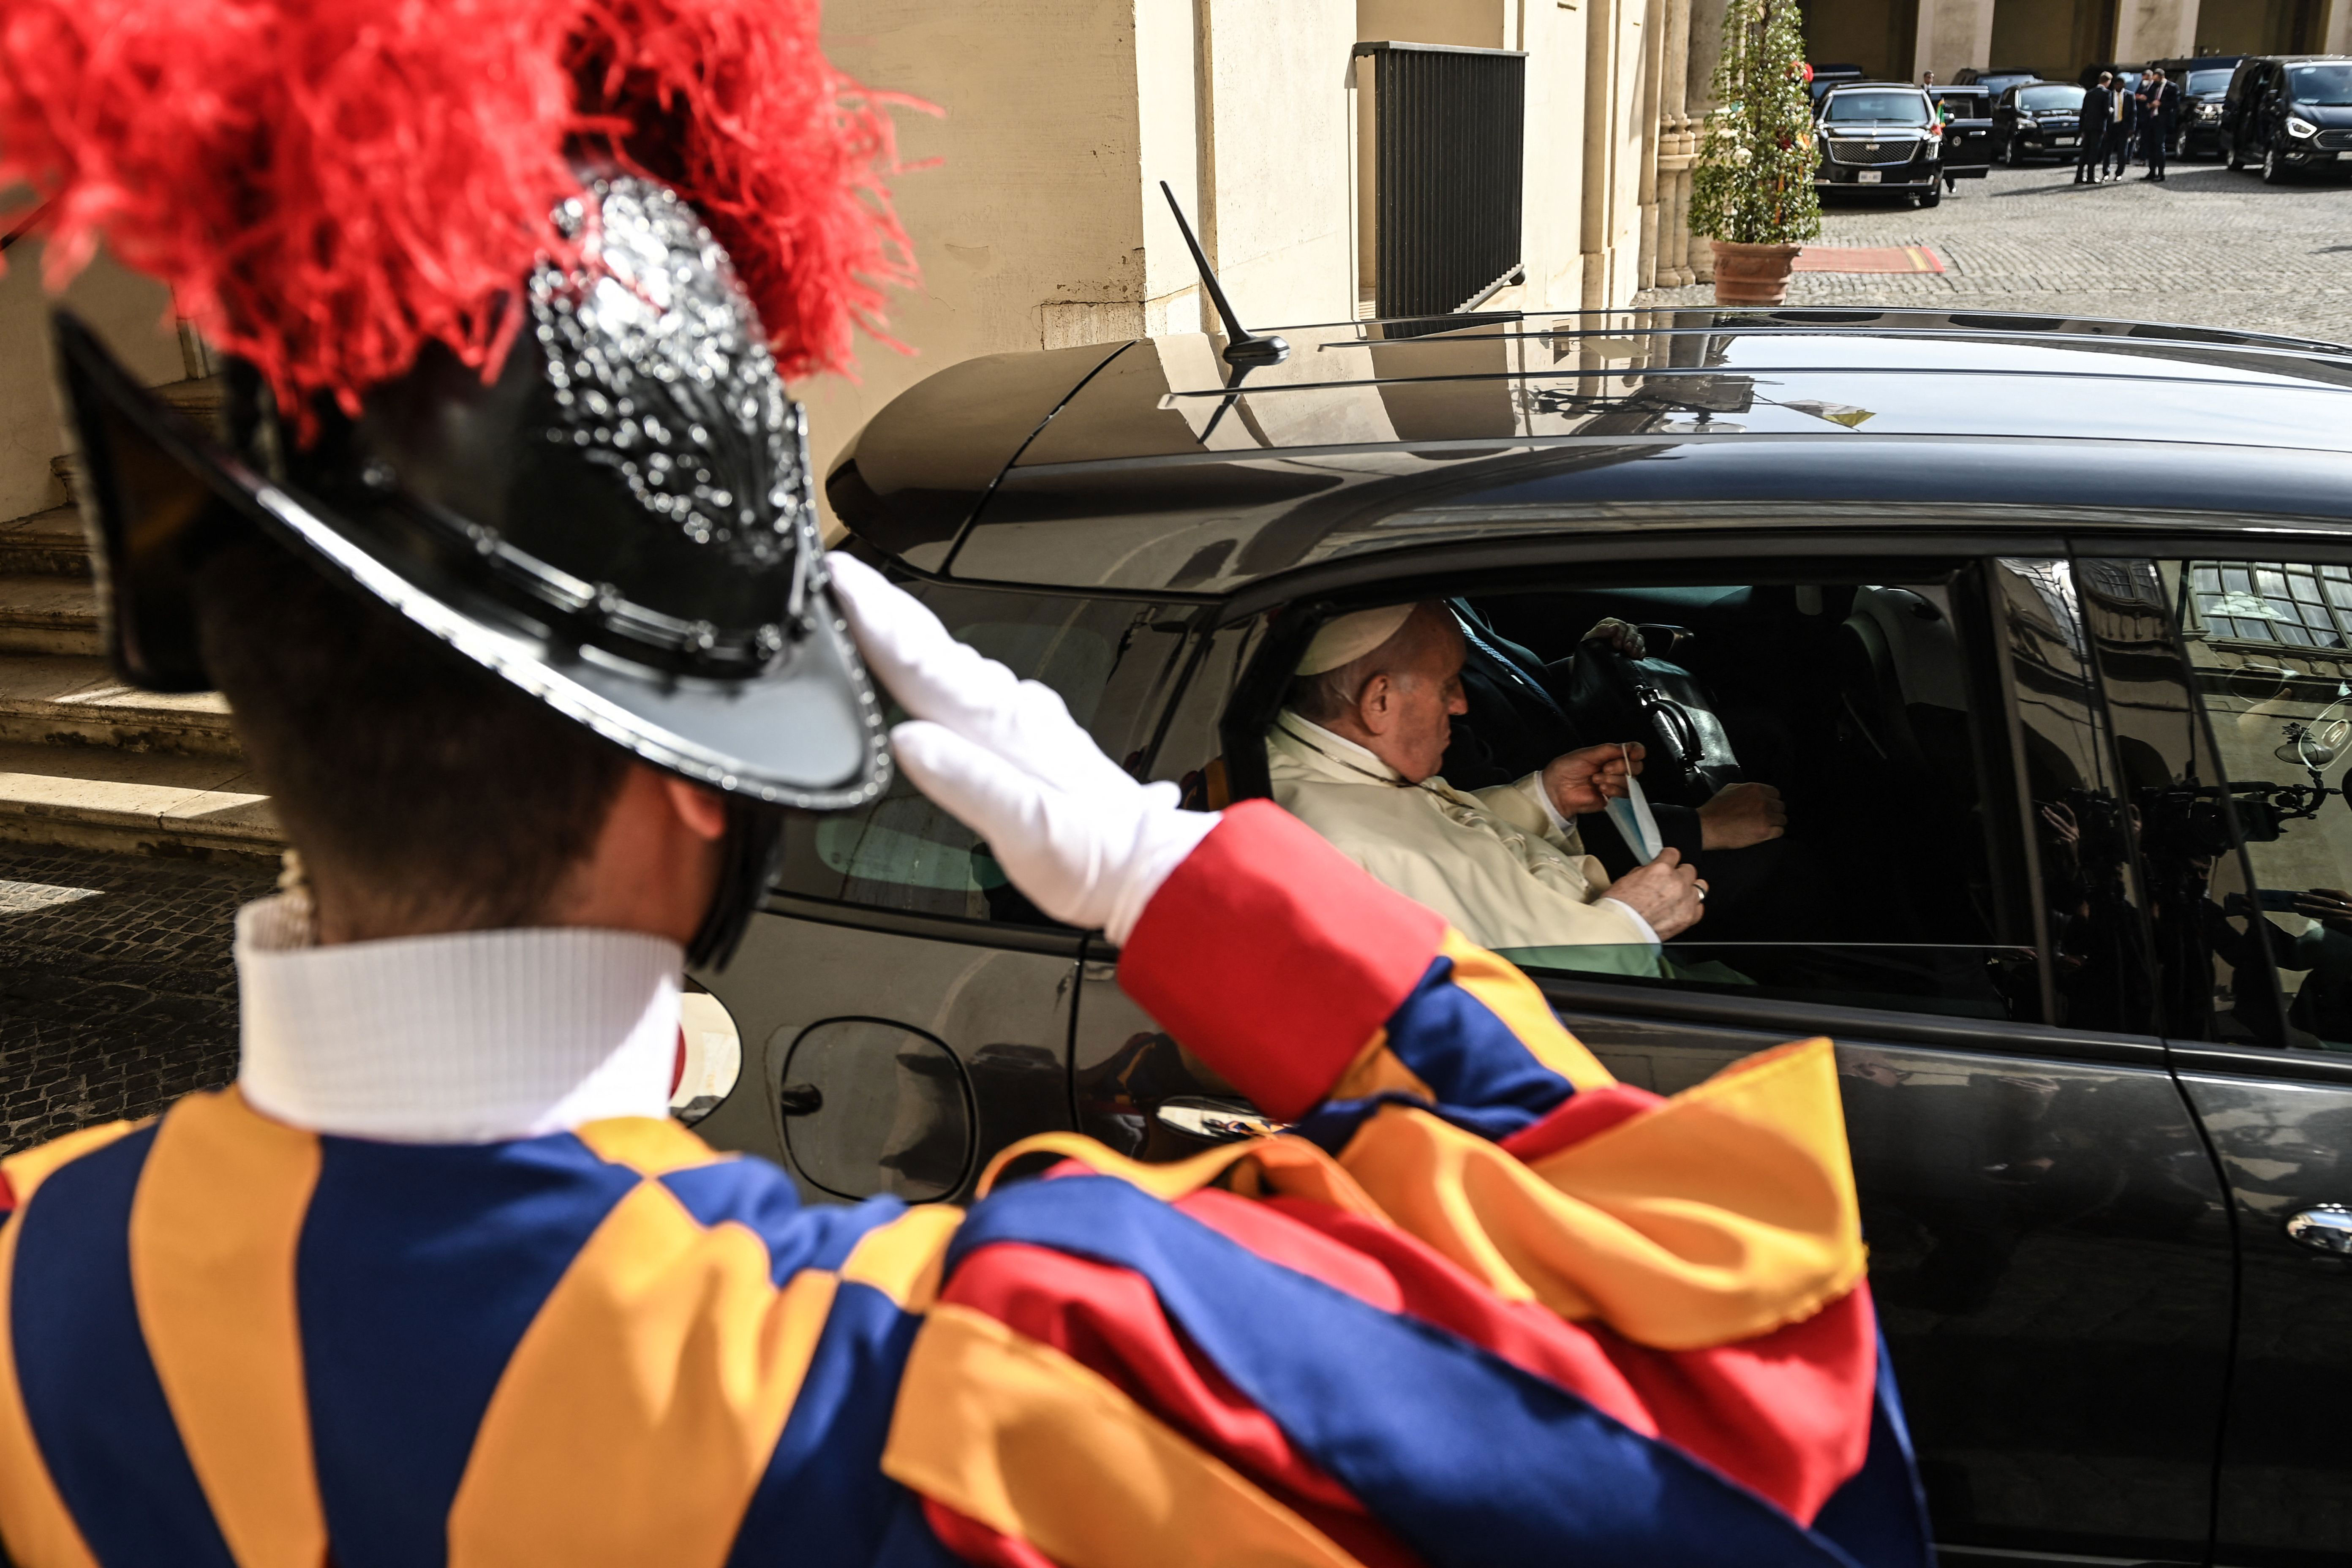 Pope Francis leaves in a car following a private audience with President Joe Biden at the Vatican on October 29.